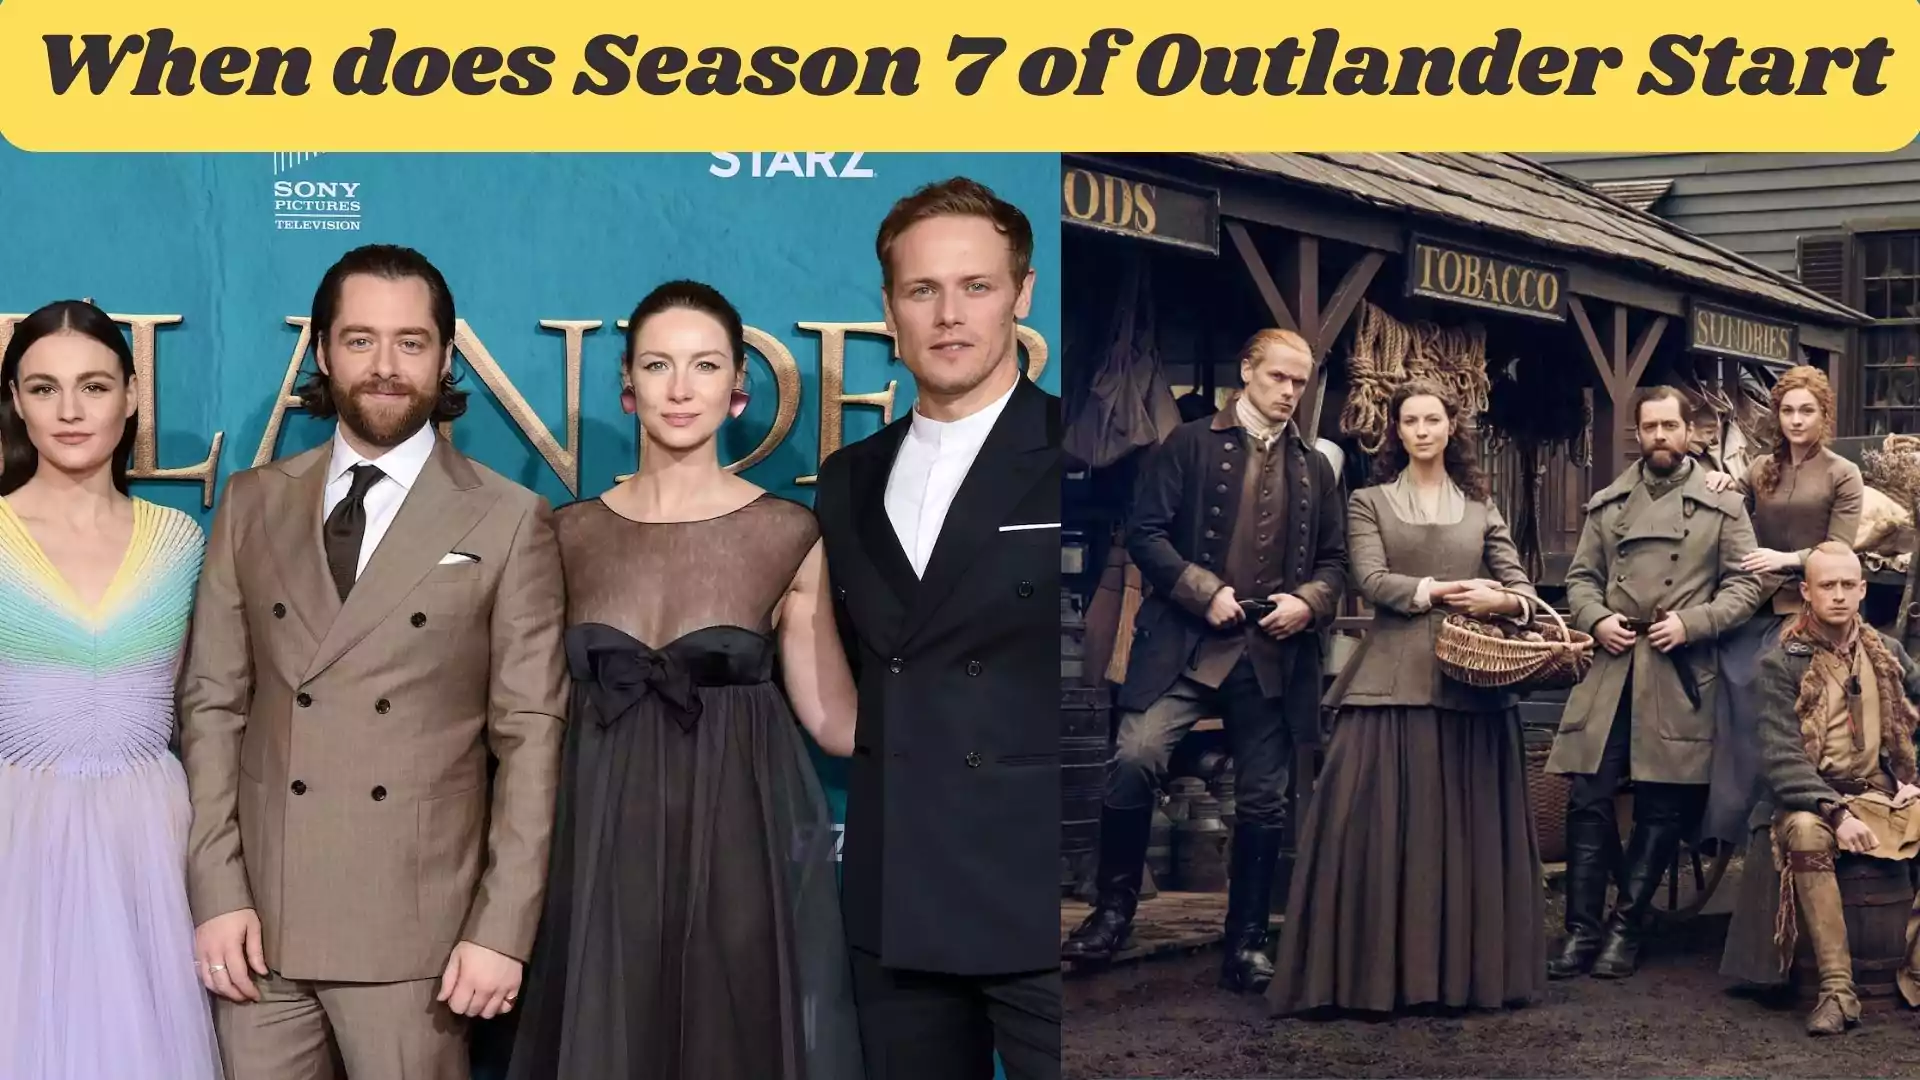 When does Season 7 of Outlander Start wallpaper and images